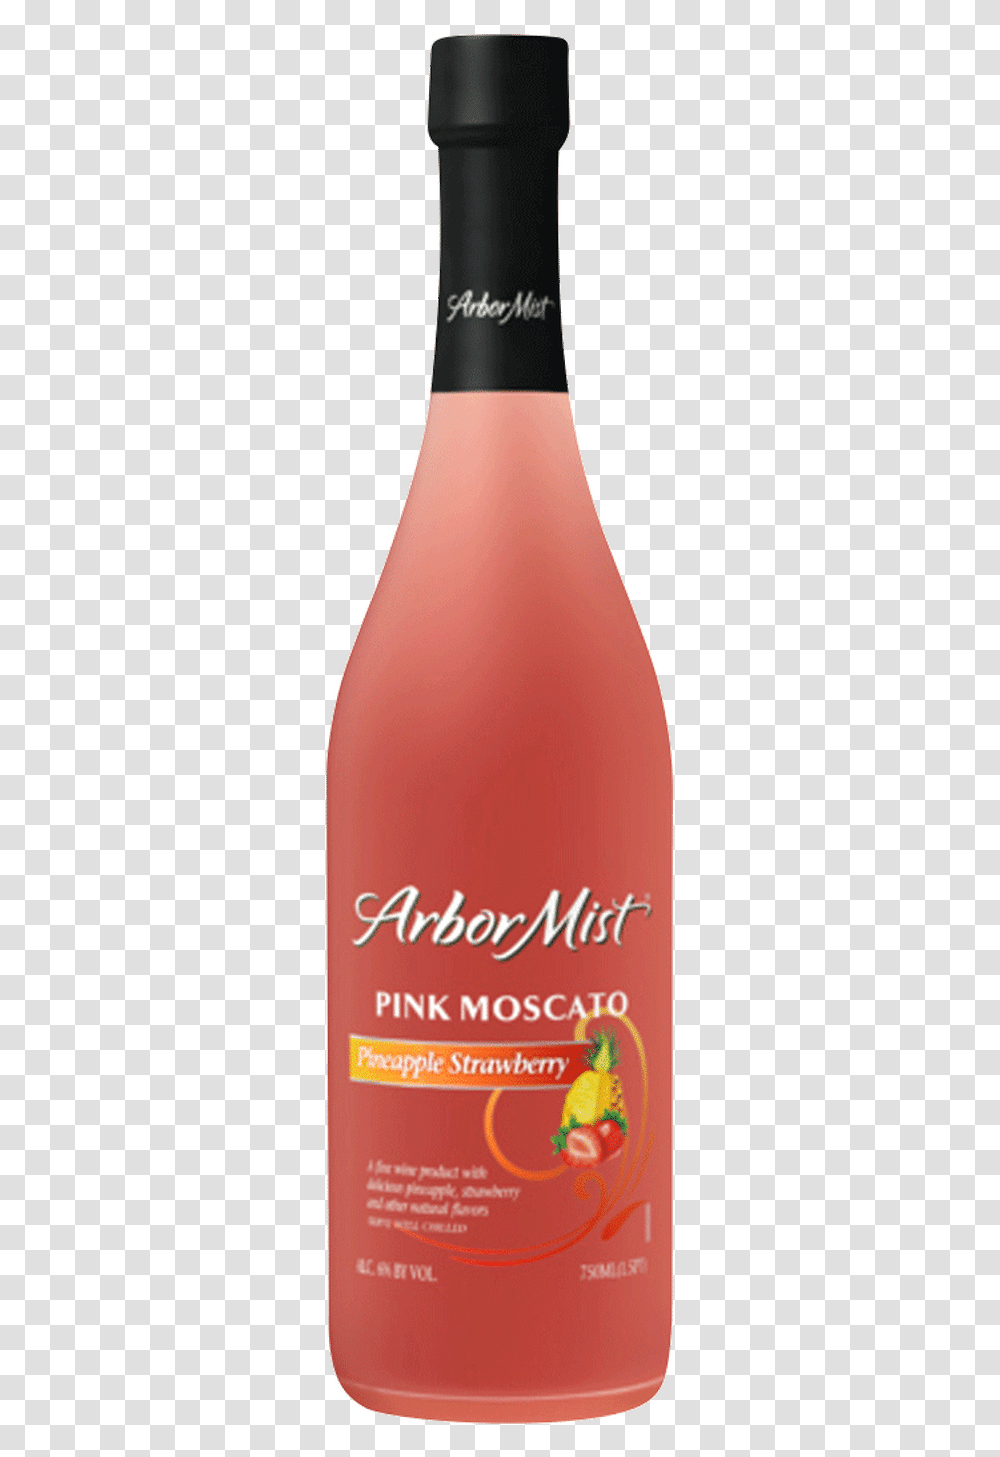 Arbor Mist Pineapplestrawberry Pink Moscato Arbor Mist Pineapple Strawberry Pink Moscato, Beverage, Alcohol, Bottle, Wine Transparent Png